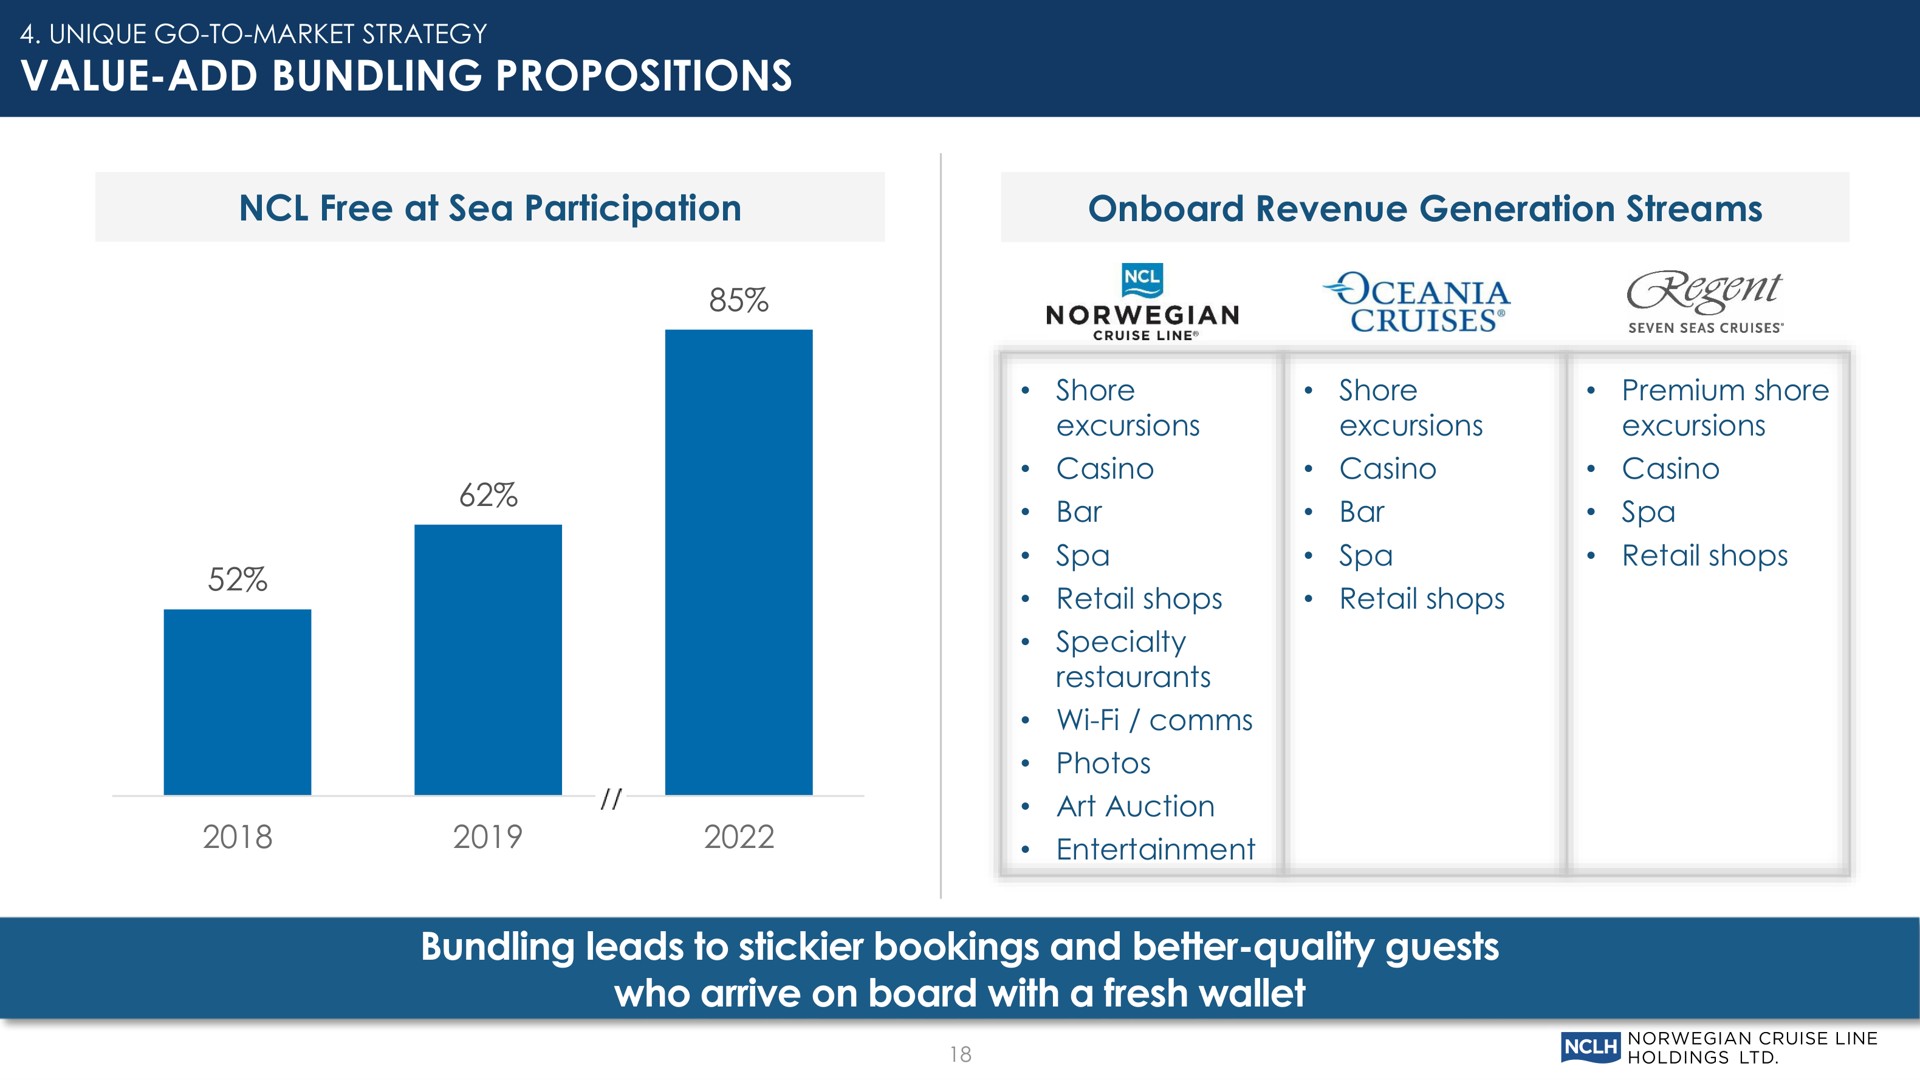 value add bundling propositions bundling leads to bookings and better quality guests who arrive on board with a fresh wallet ase | Norwegian Cruise Line